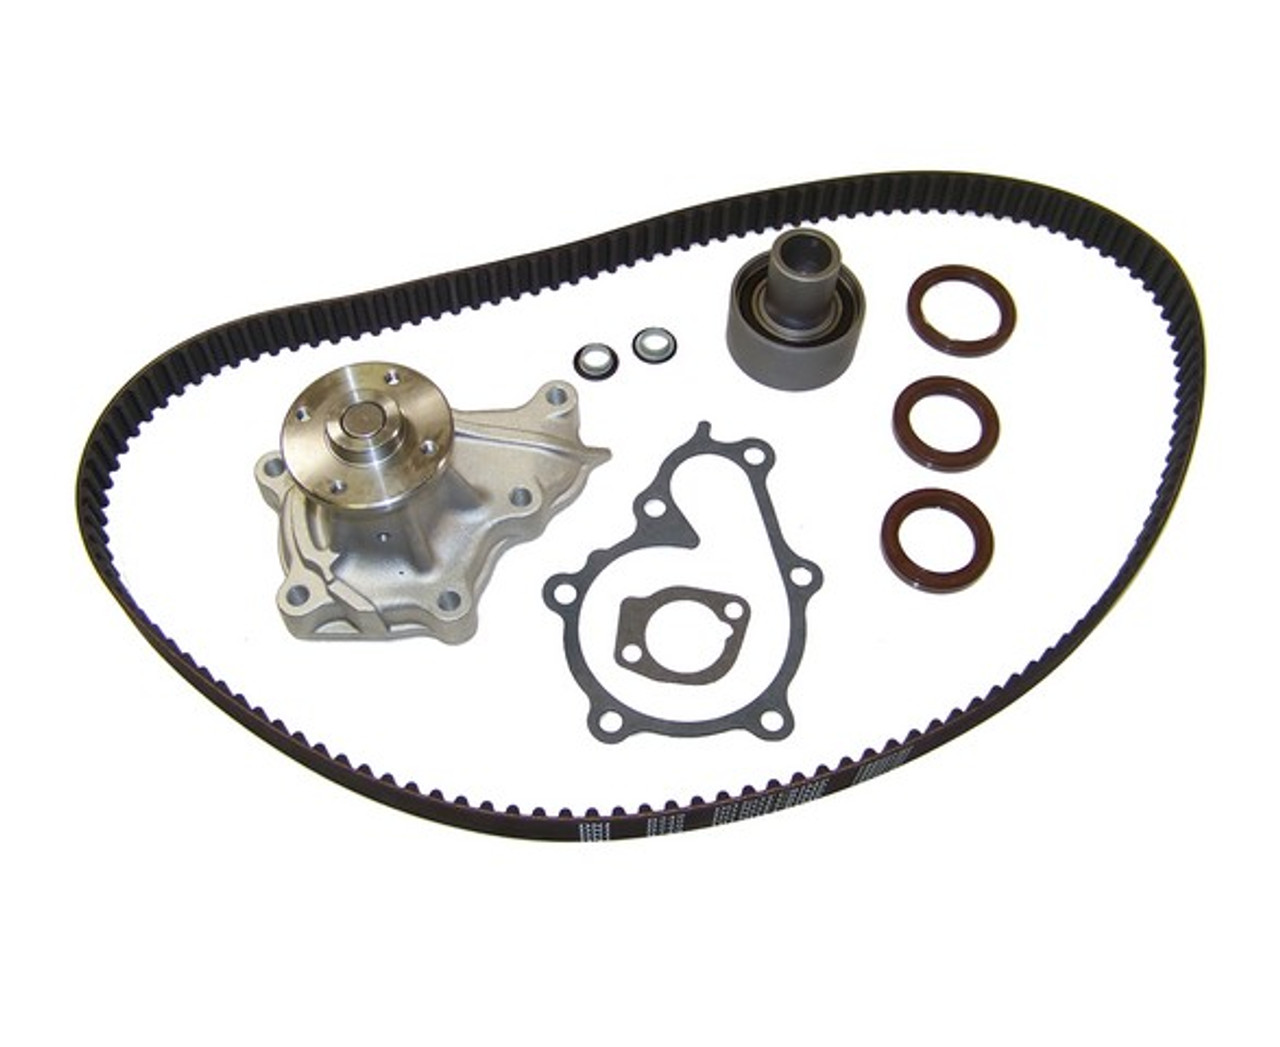 Timing Belt Kit with Water Pump 3.3L 1999 Mercury Villager - TBK634BWP.1